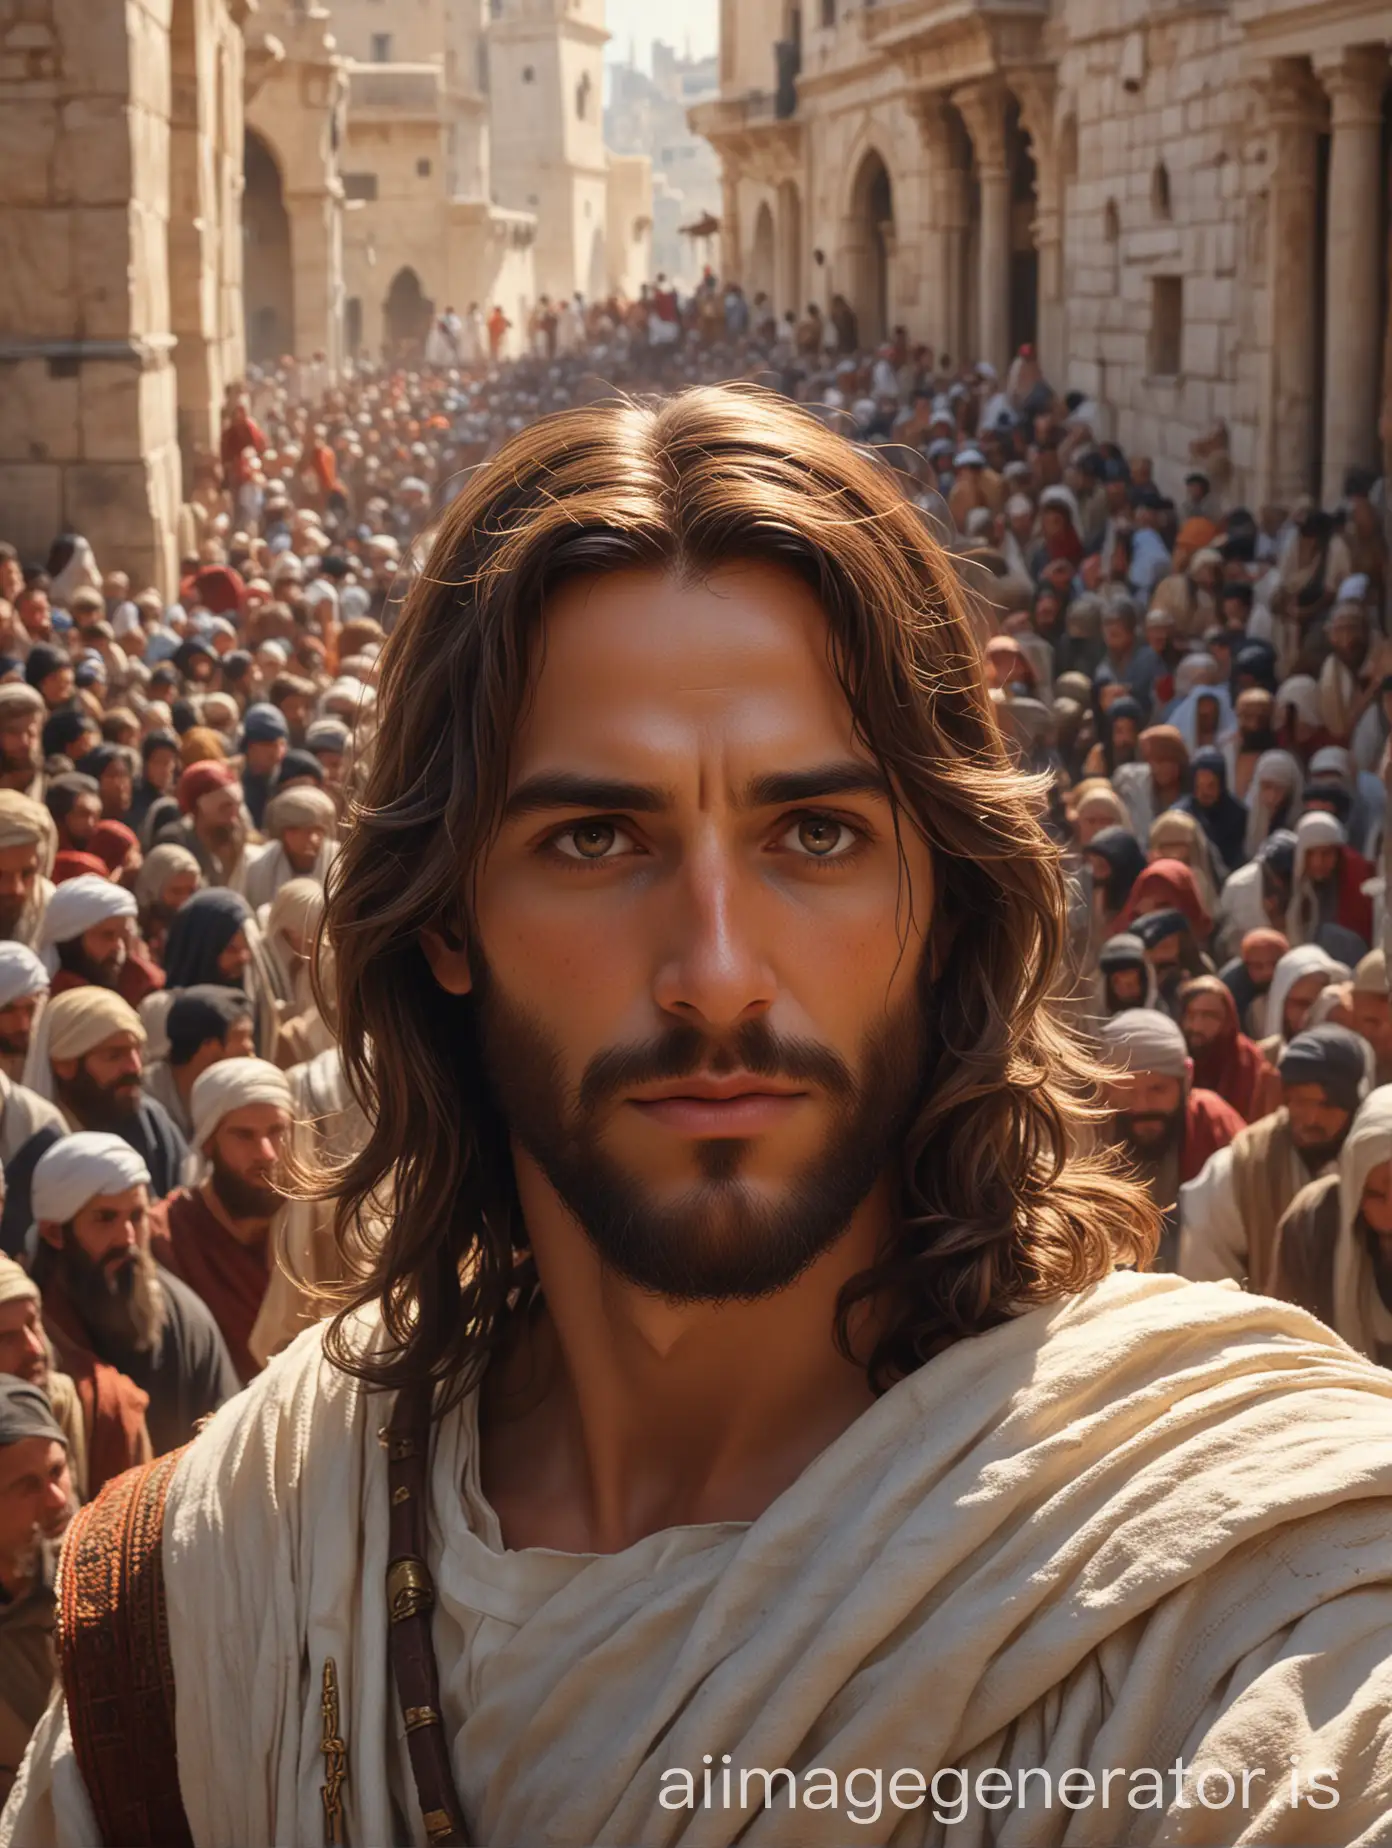 close up image of a male Jesus on the temple mount surrounded by people, Shutterstock, epic fantasy card game art, James Gurney and Andreas Rocha, highly detailed high resolution, high quality photography